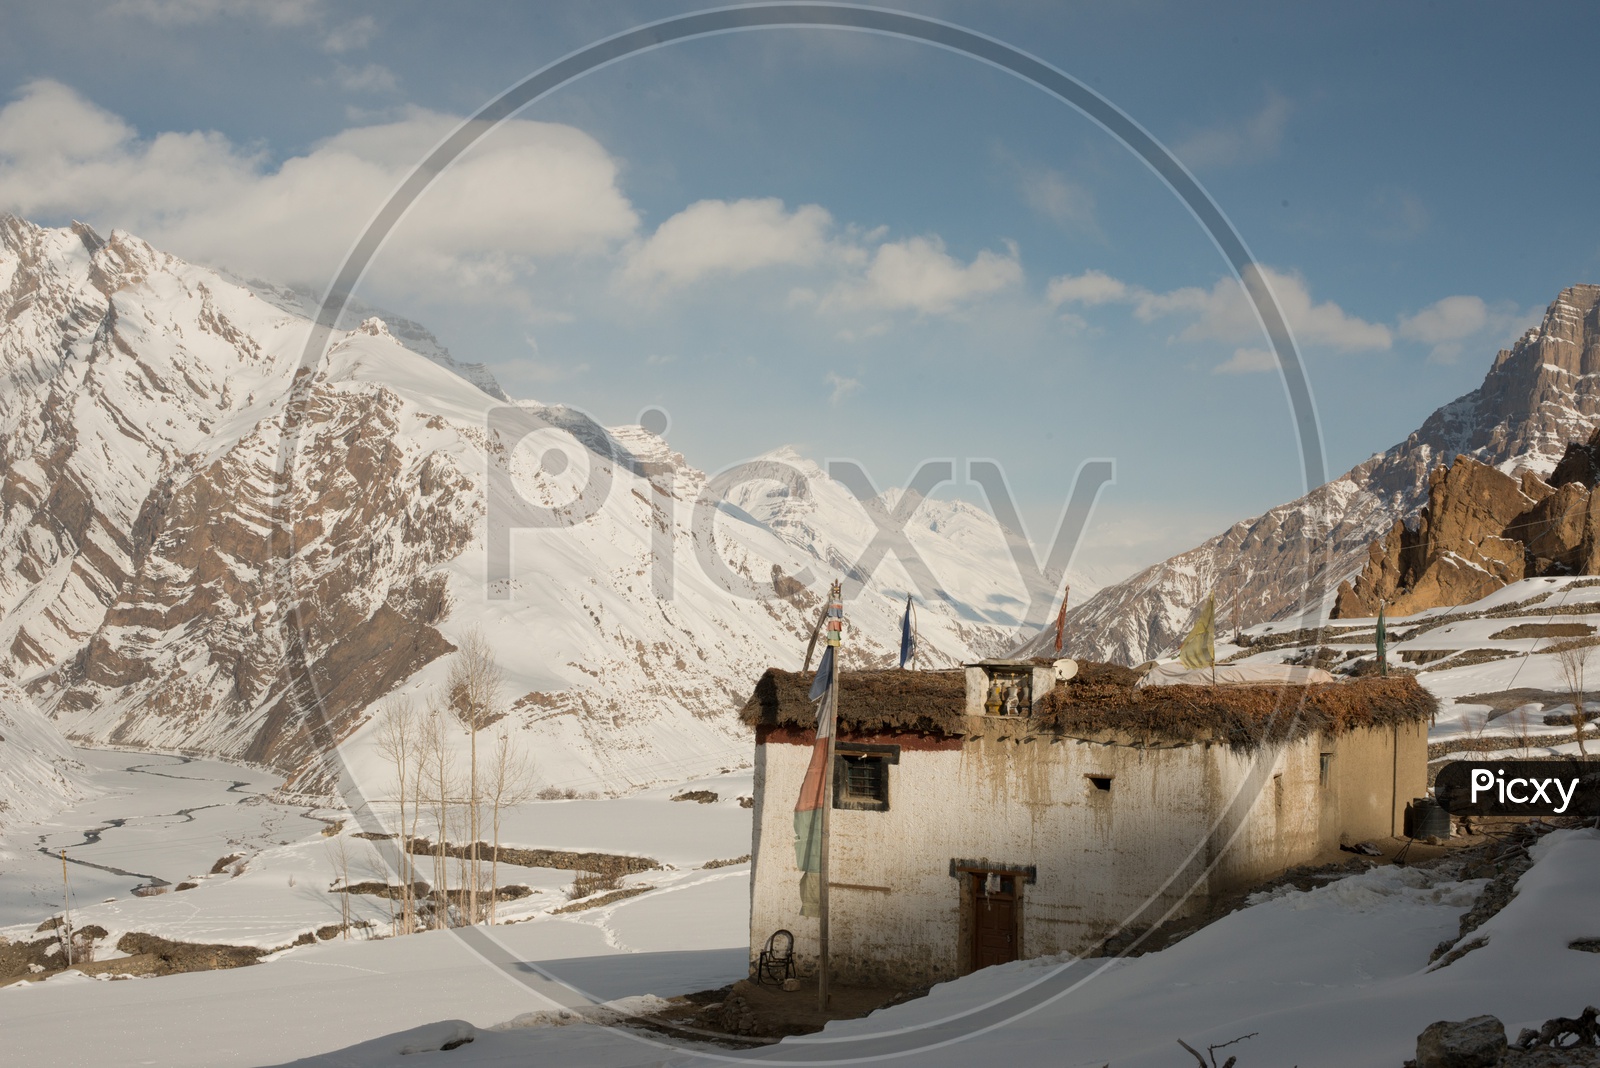 A Small House in Rural Village with Snow Capped Mountains in Background